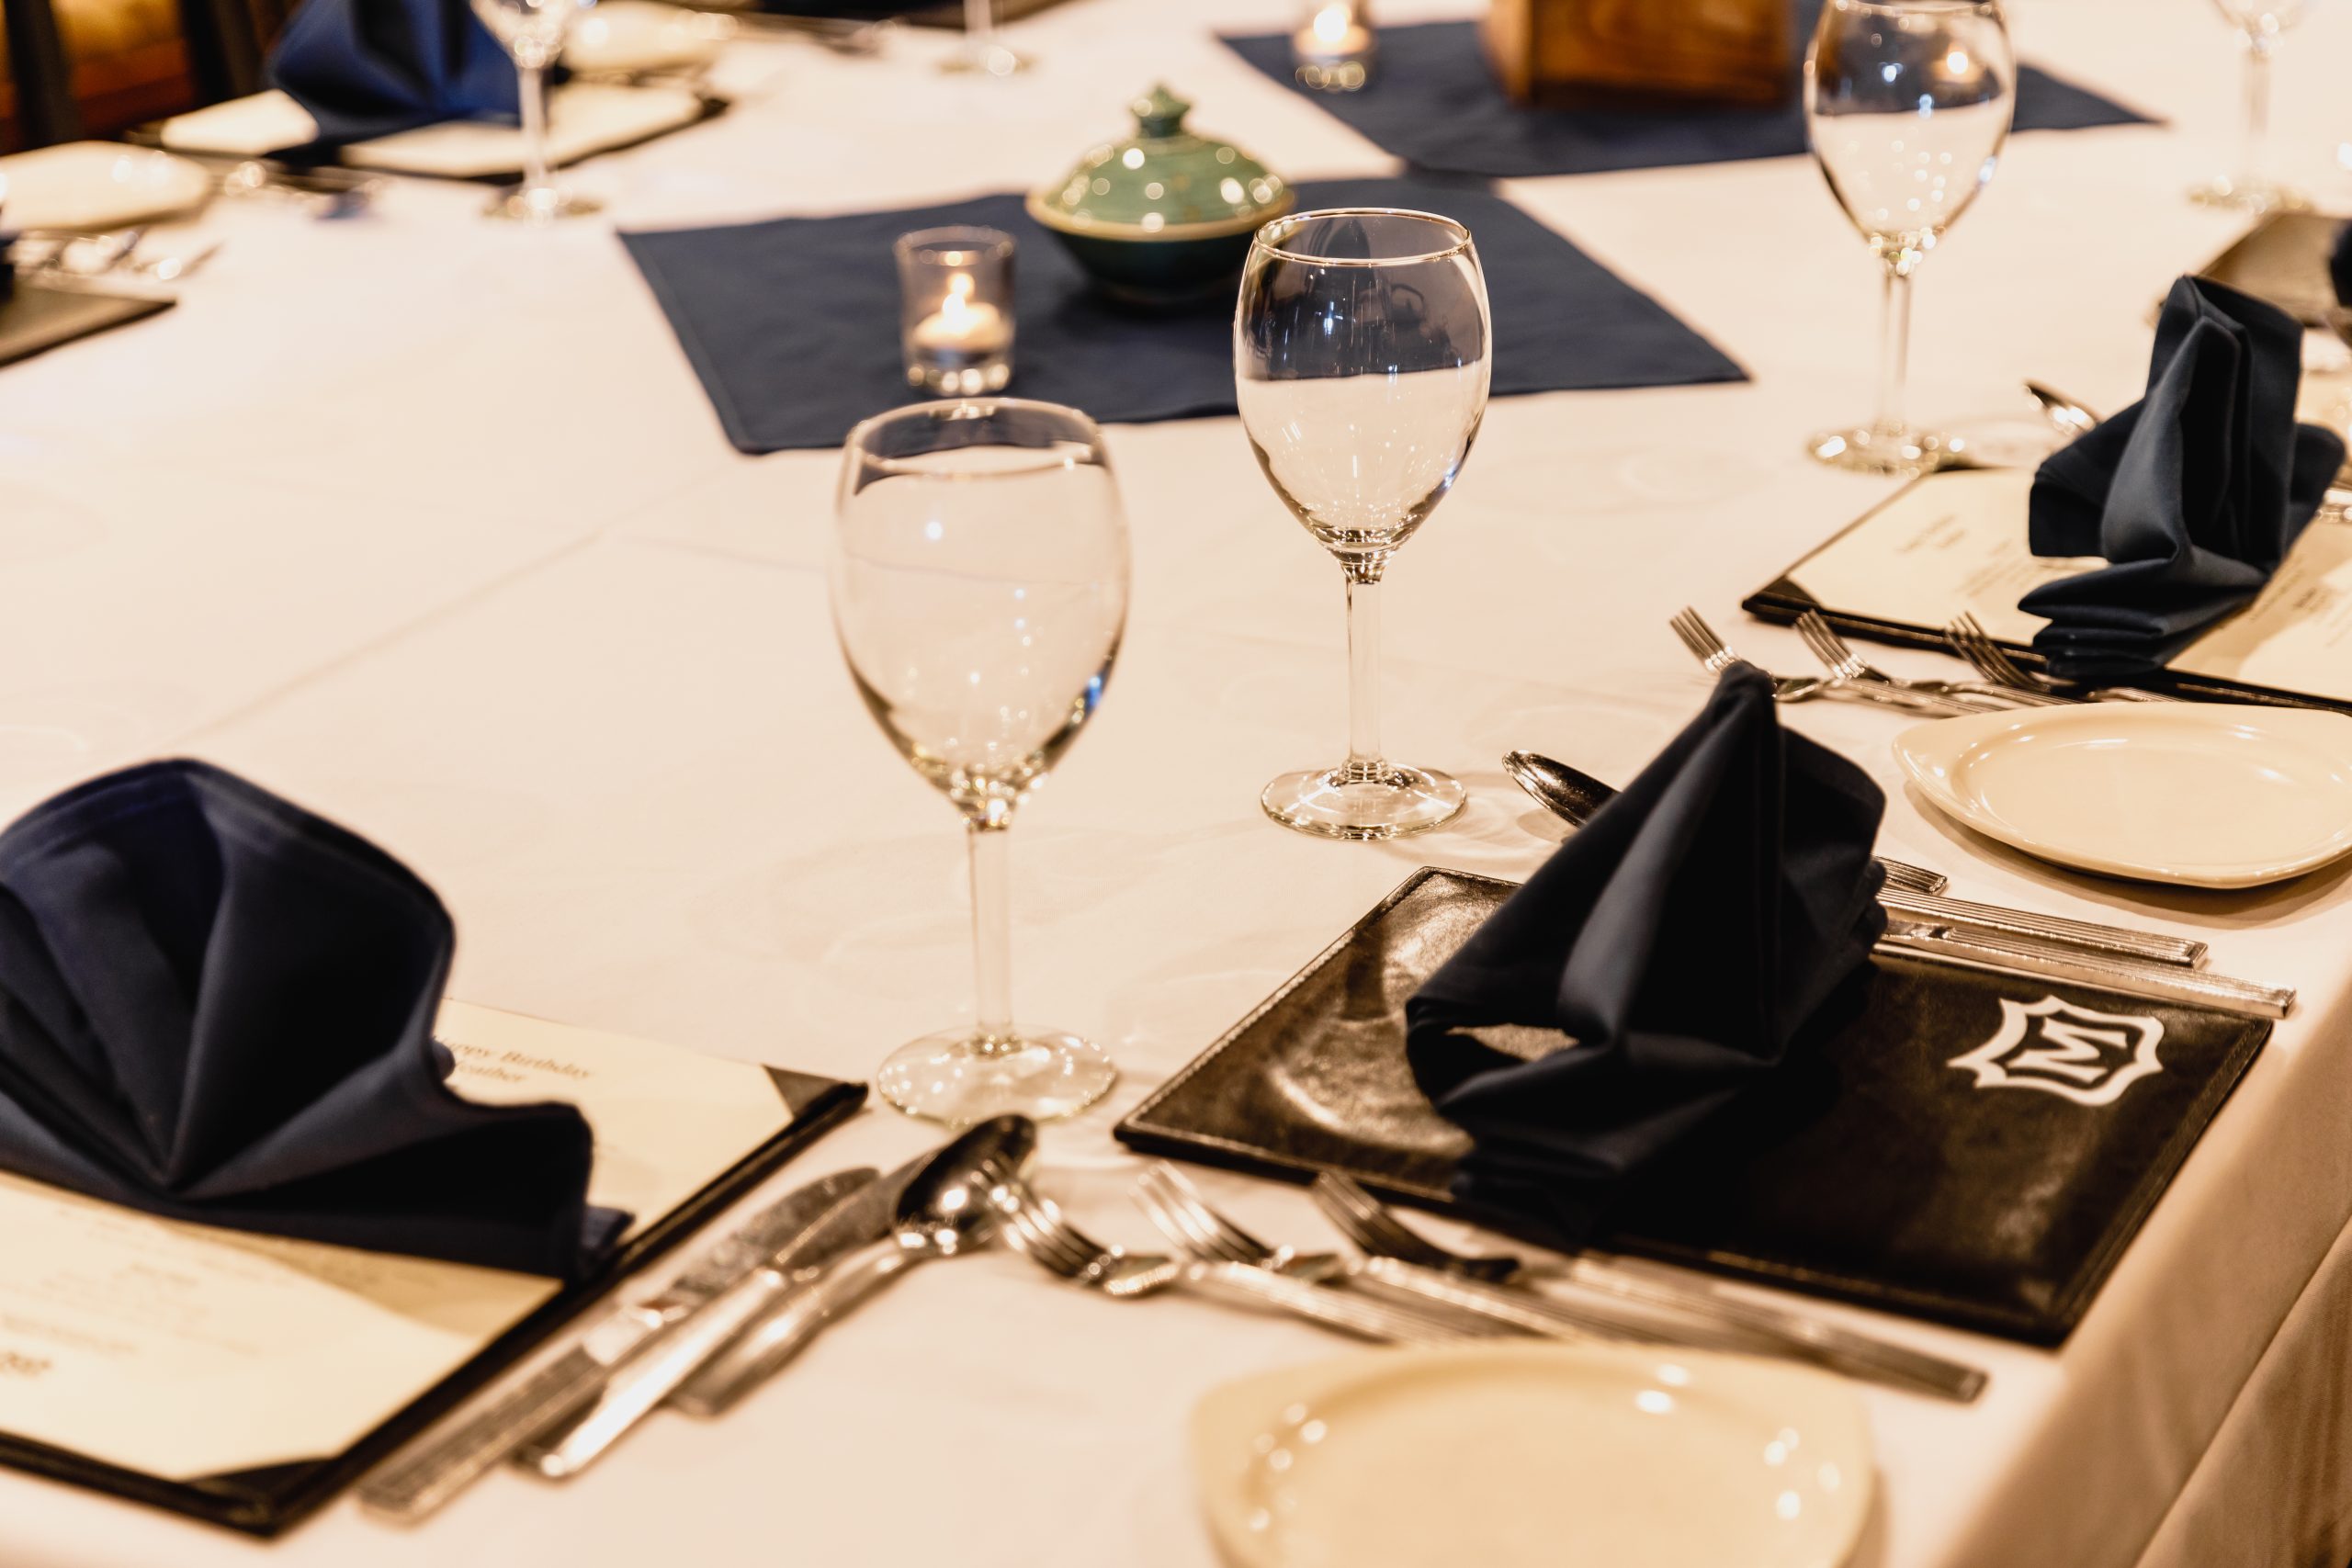 An elegant table setting at a high-end restaurant prepared for a private event.